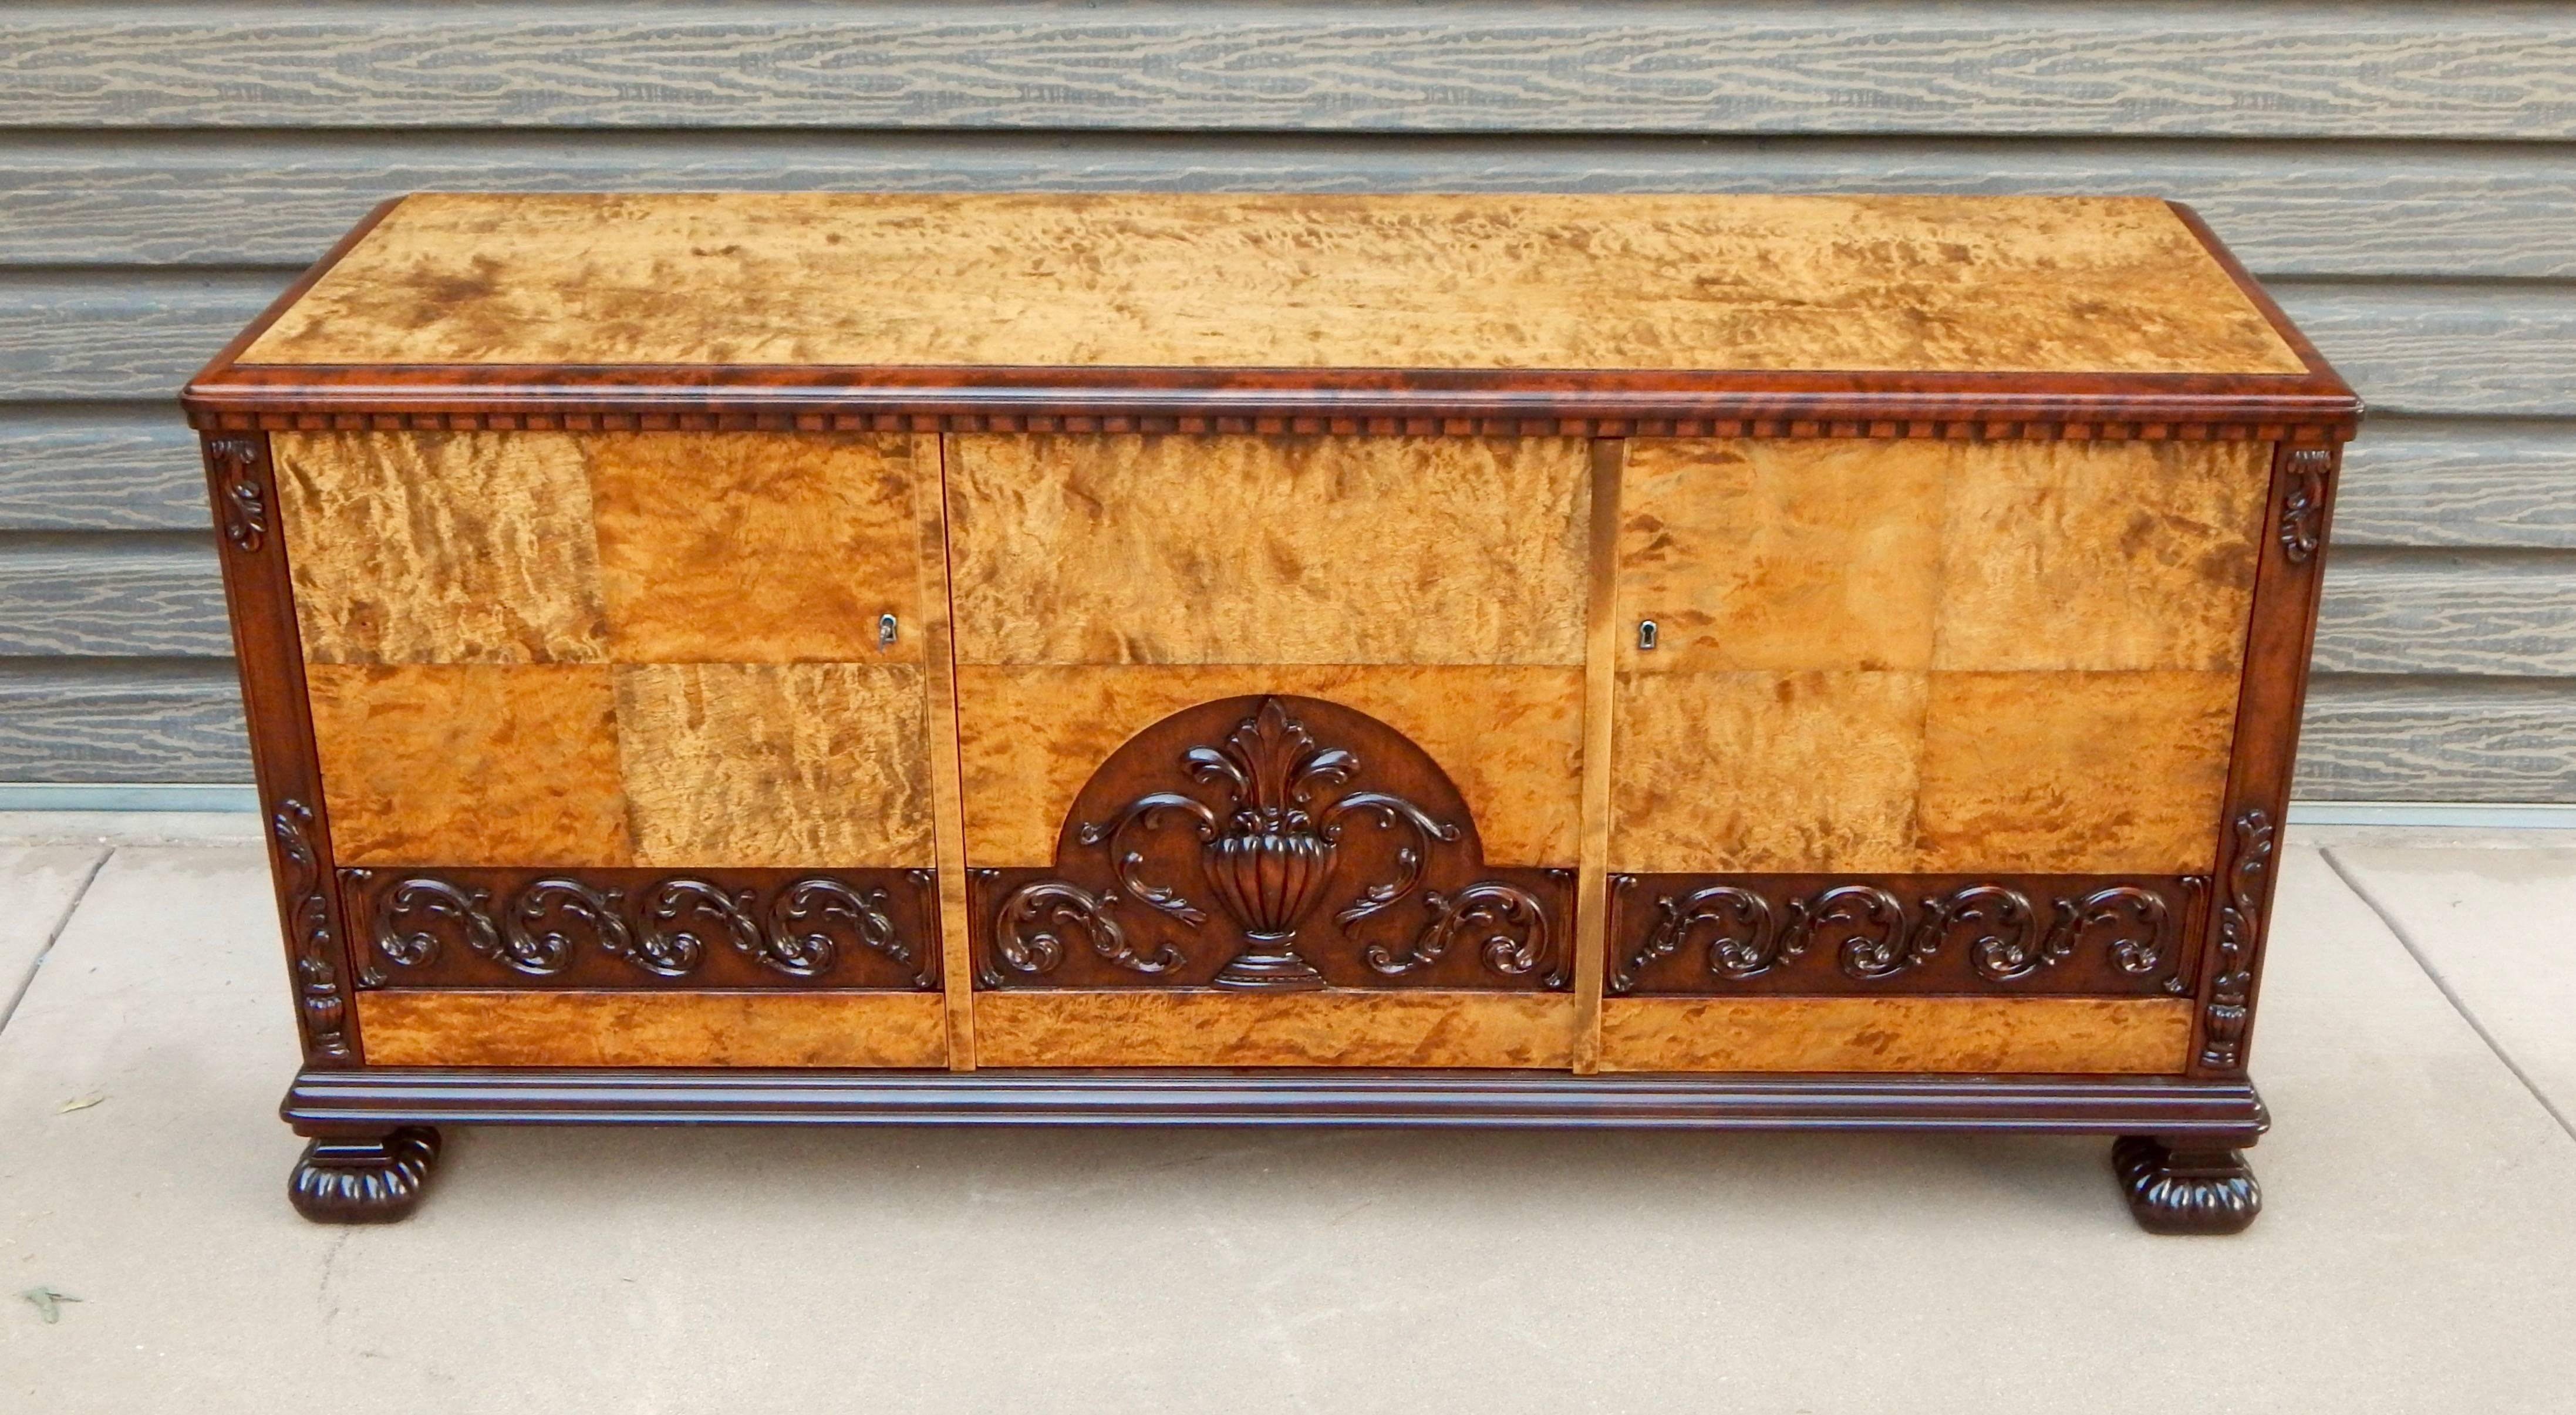 Swedish Art Deco neo-classically inspired sideboard cabinet rendered in bookmatched, highly figured golden flame birchwood. Neo-classically inspired high relief carving and detailing in stained birch. Made in Sweden in the 1920s. Beautifully